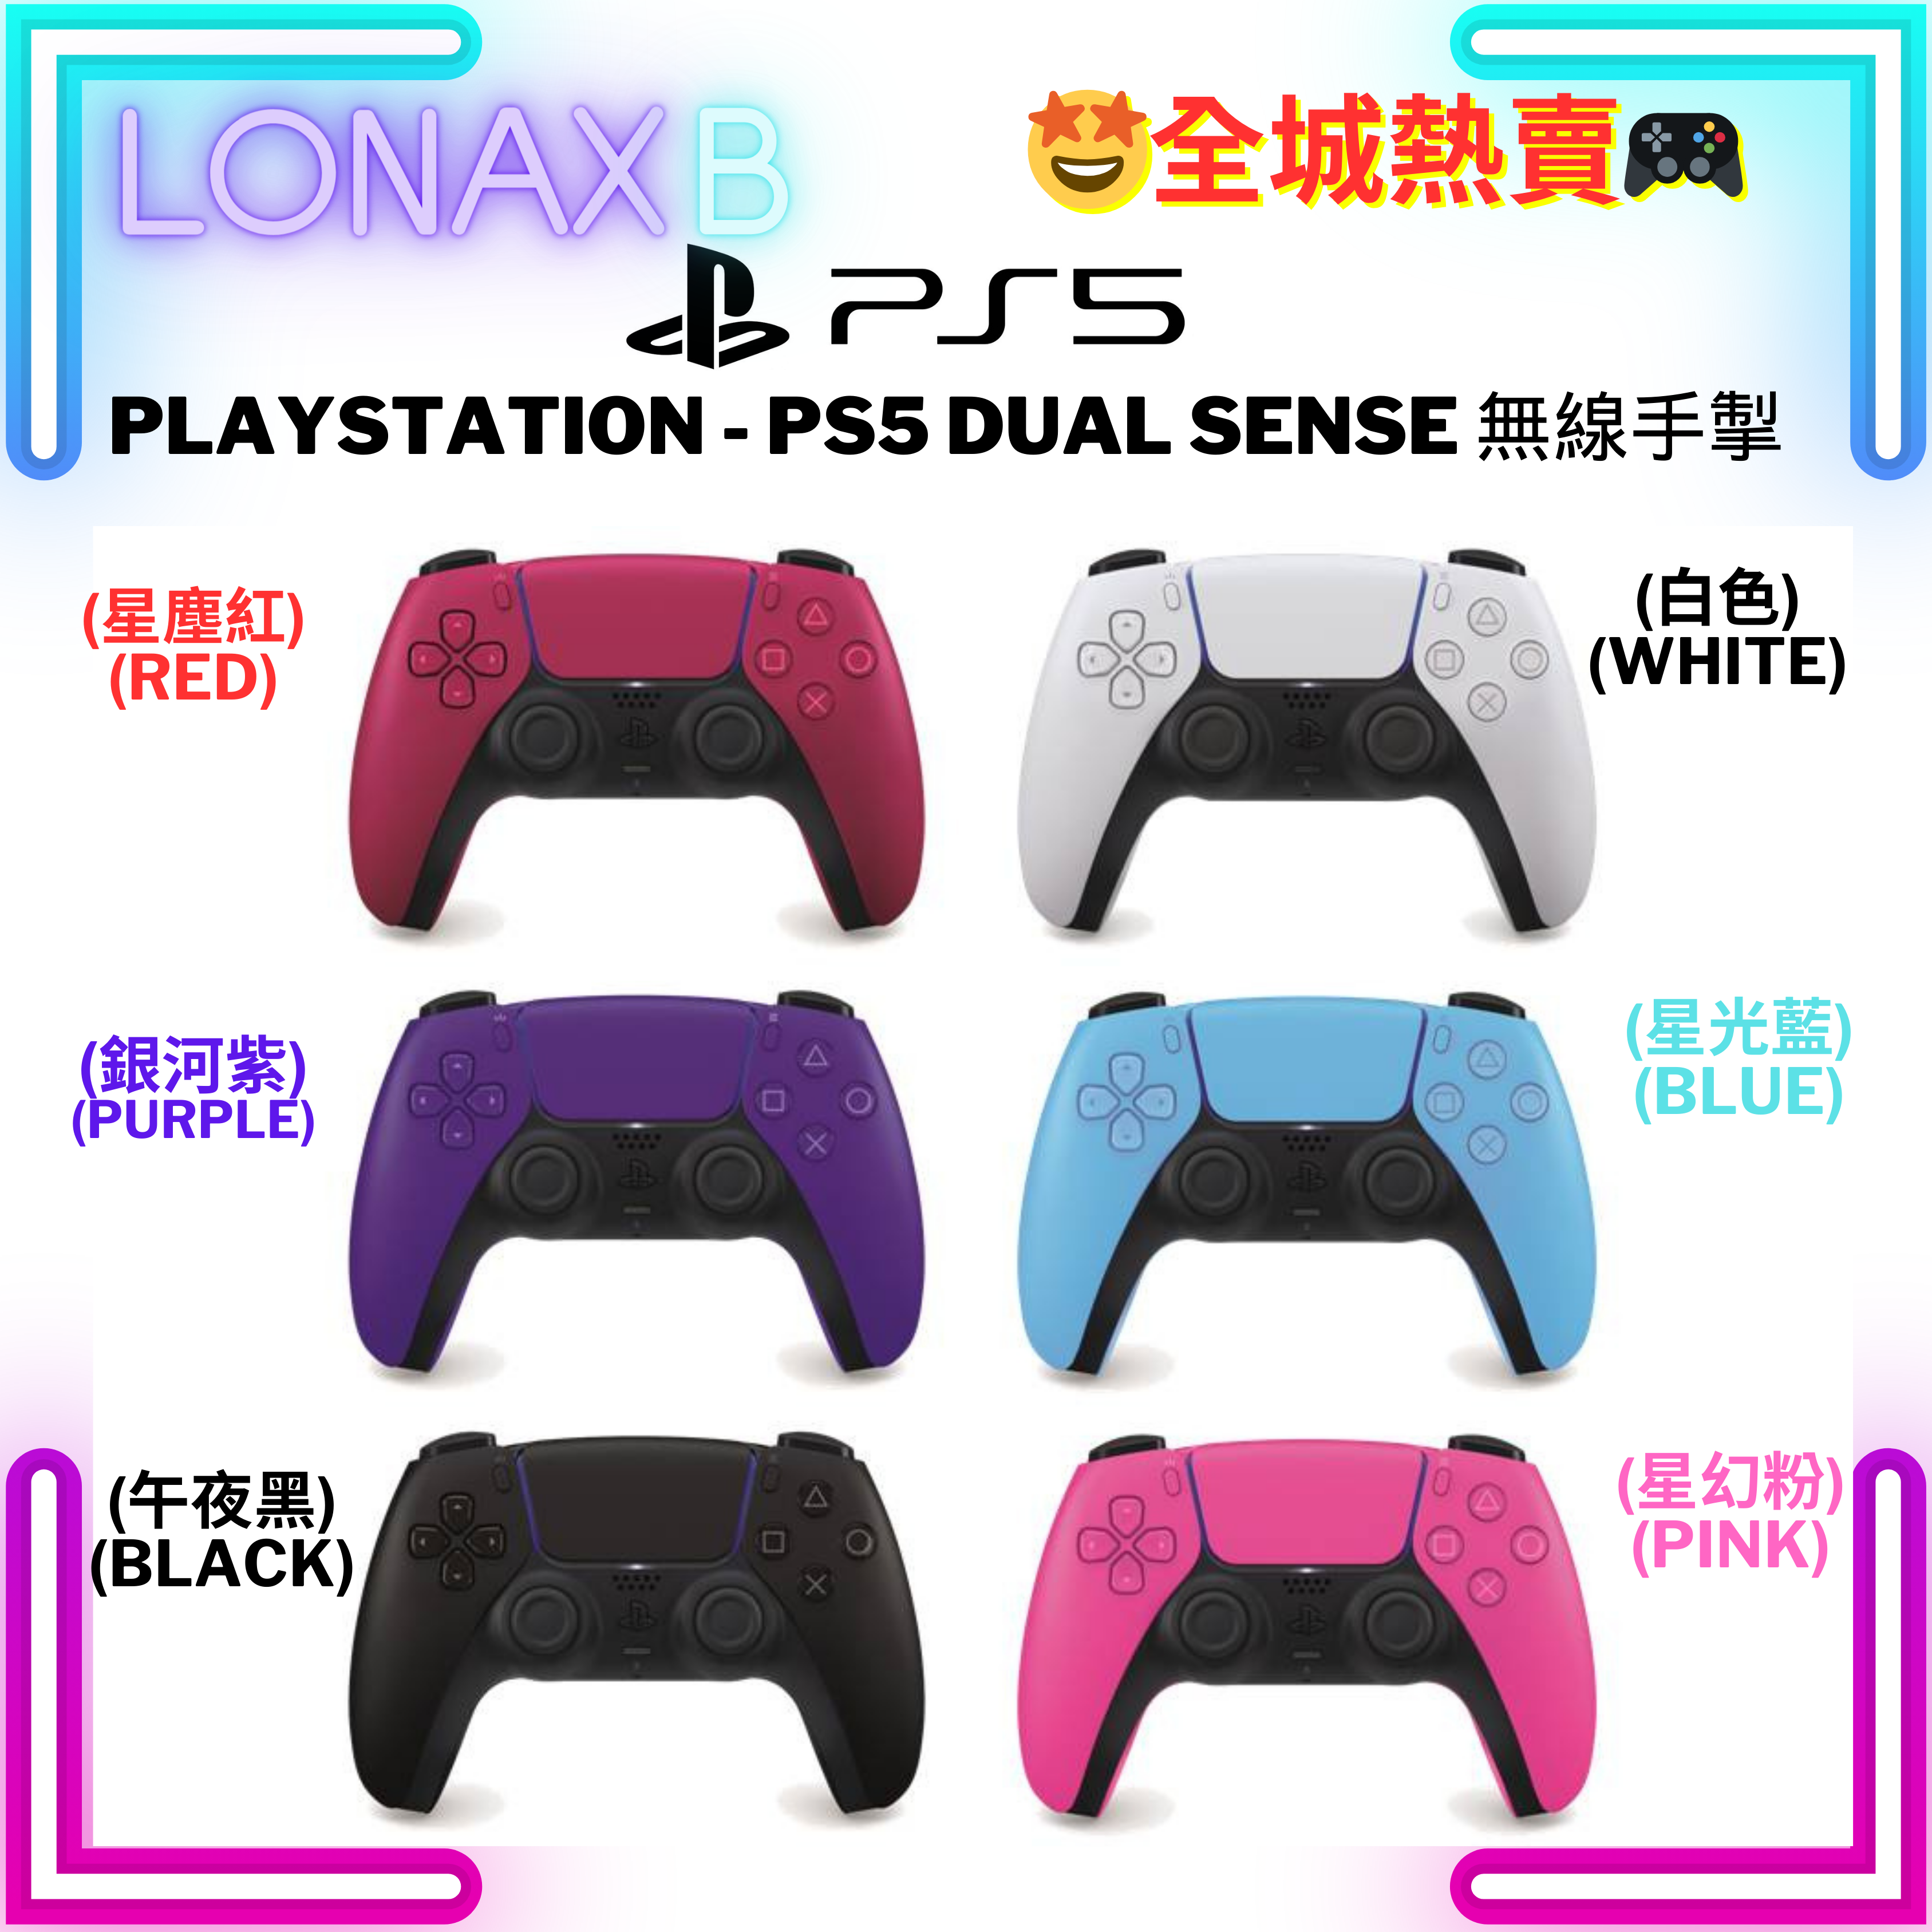 SONY - PlayStation5 PS5 DualSense Wireless Controller- (Parallel Import)